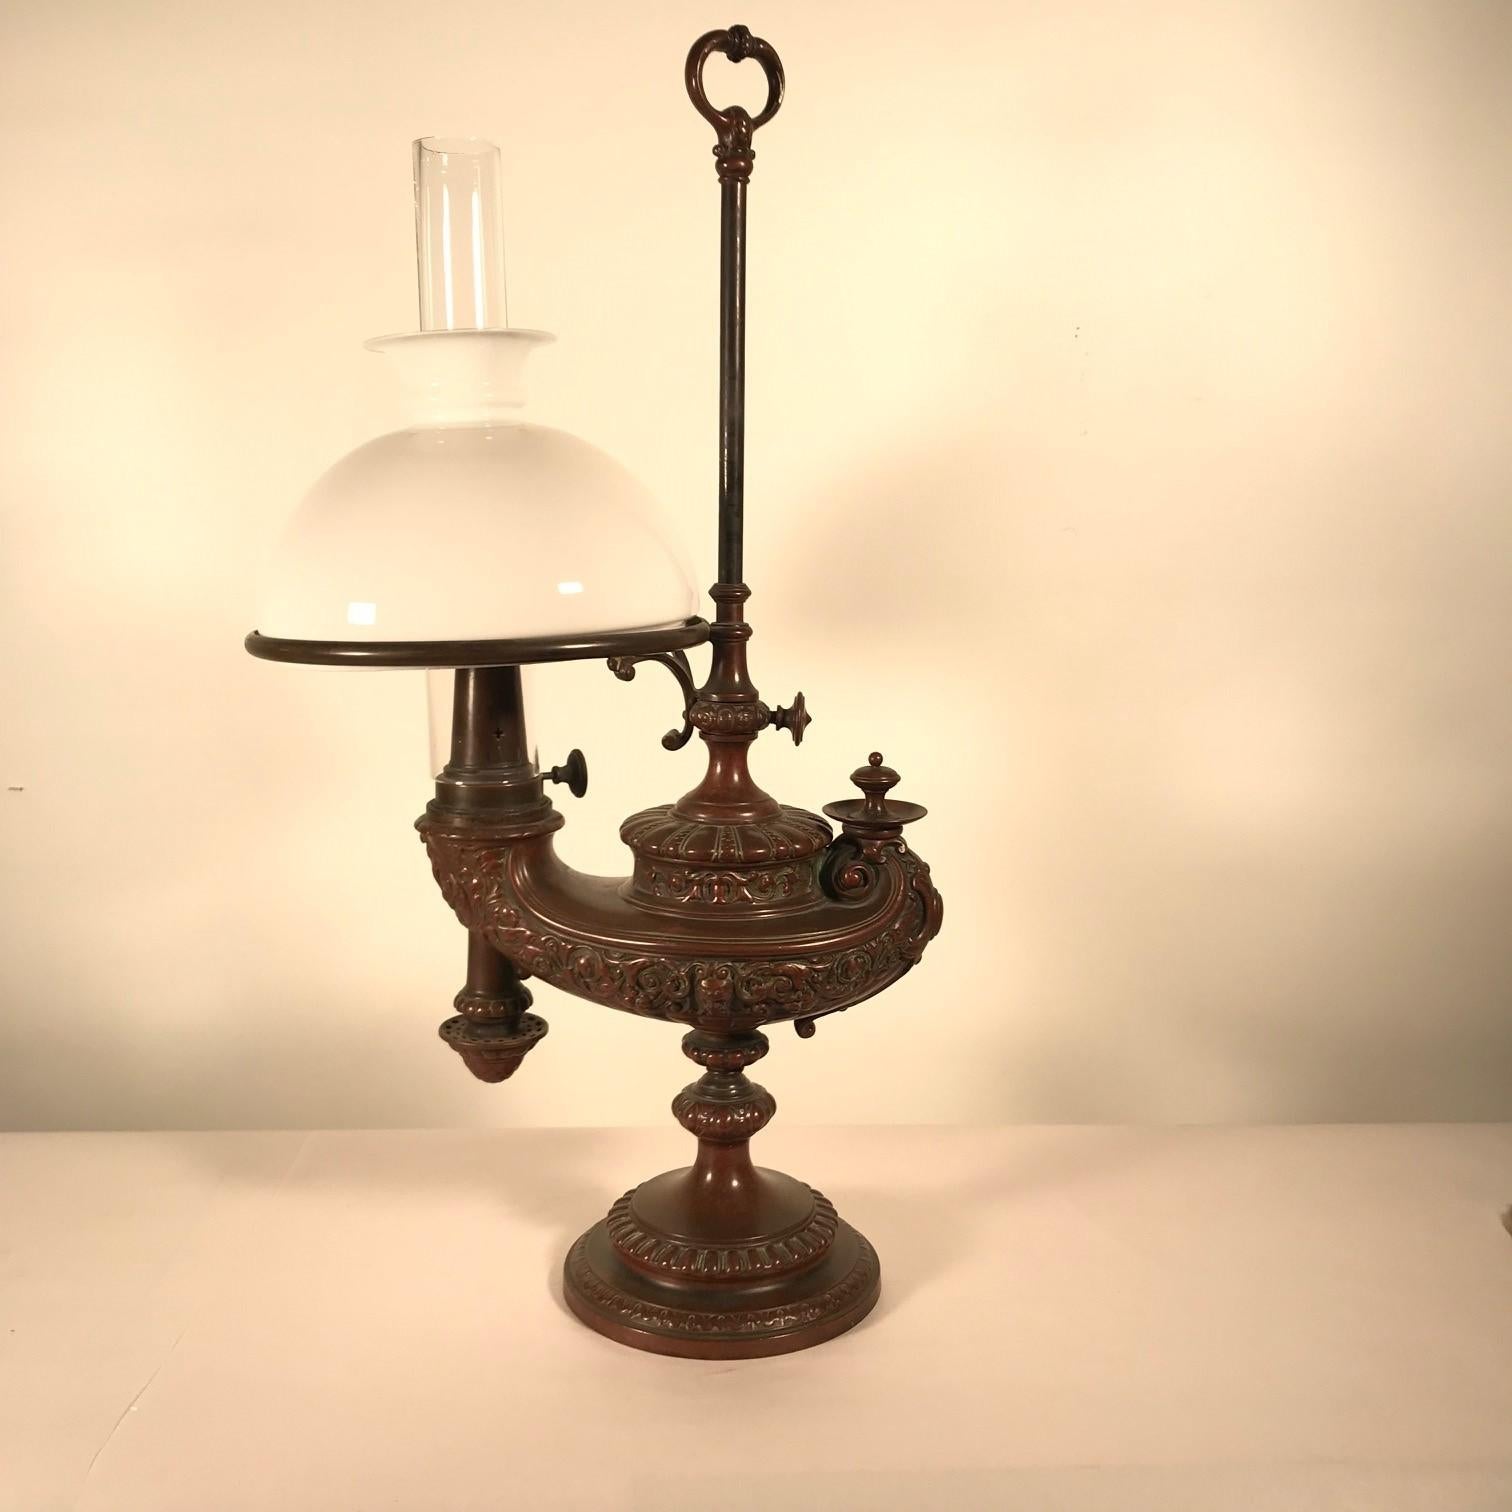 This Aladdin lamp is German, and dates from the late 19th century, The bronze is exquisitely cast in bas-relief with masks and scrolling acanthus. The base and knopped stem ,the sliding shade support, and reservoir are all crisply cast although